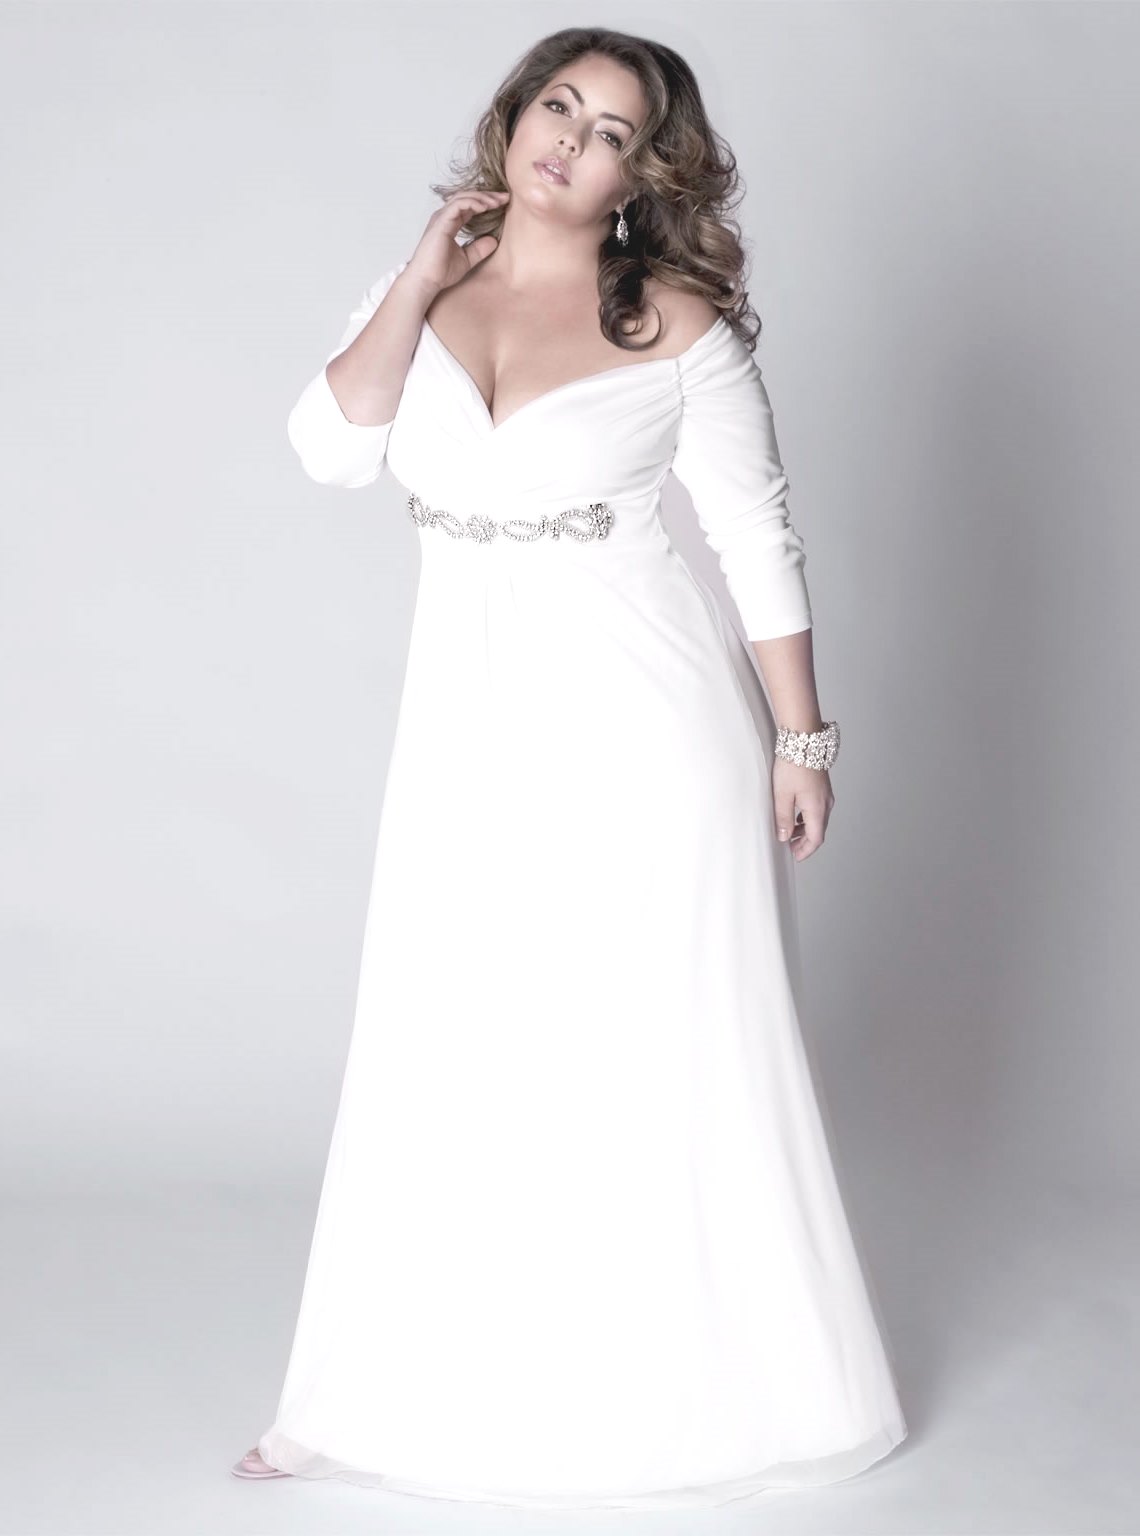 Best Wedding Dresses Plus Size With Sleeves of the decade Don t miss out 